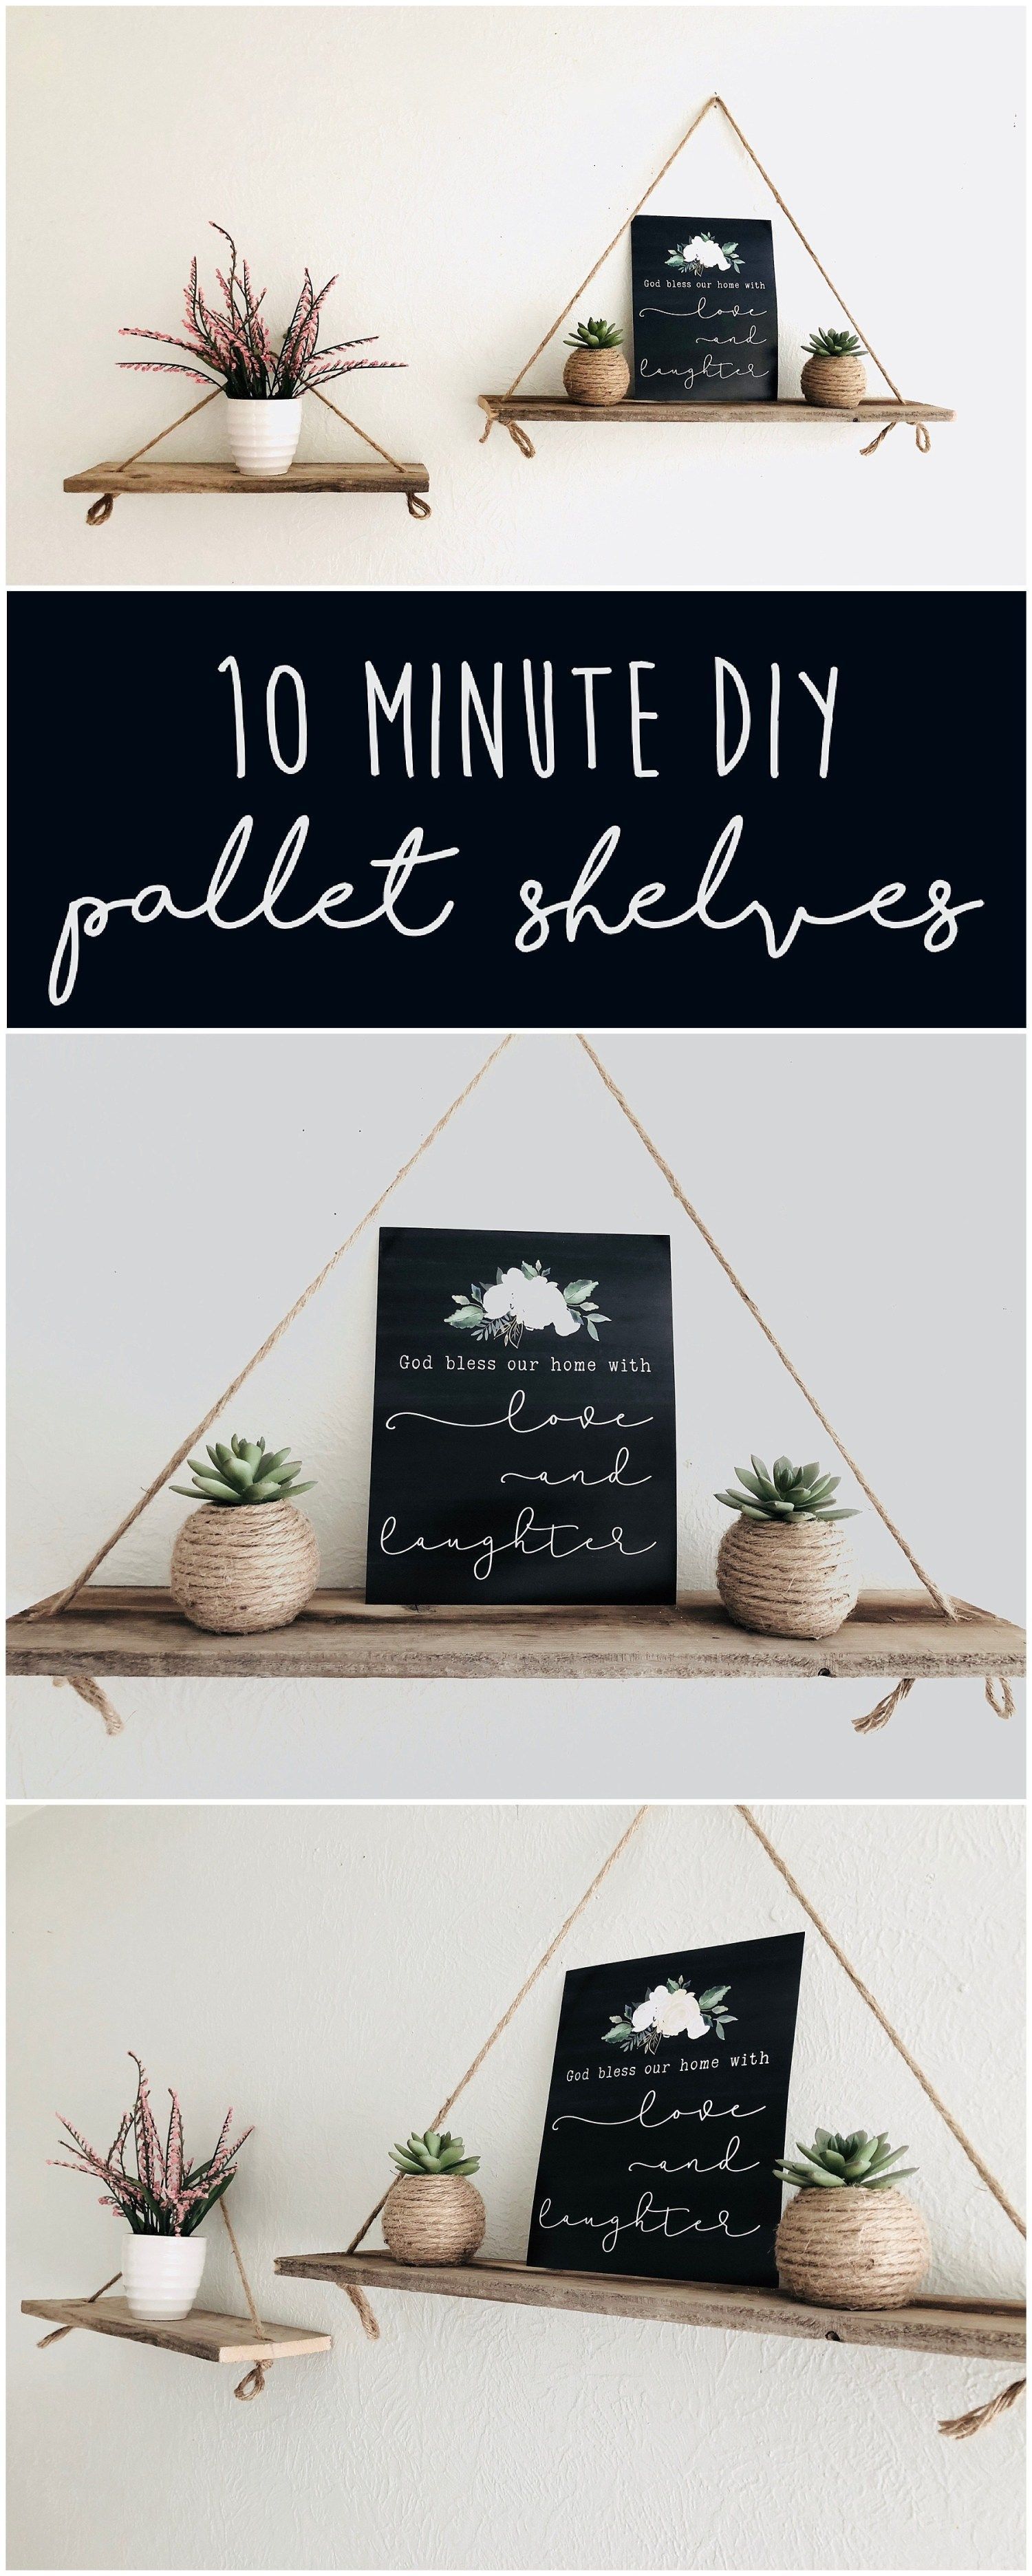 Easy DIY Pallet Shelves - Six Clever Sisters - Easy DIY Pallet Shelves - Six Clever Sisters -   16 diy Decoracion simple ideas